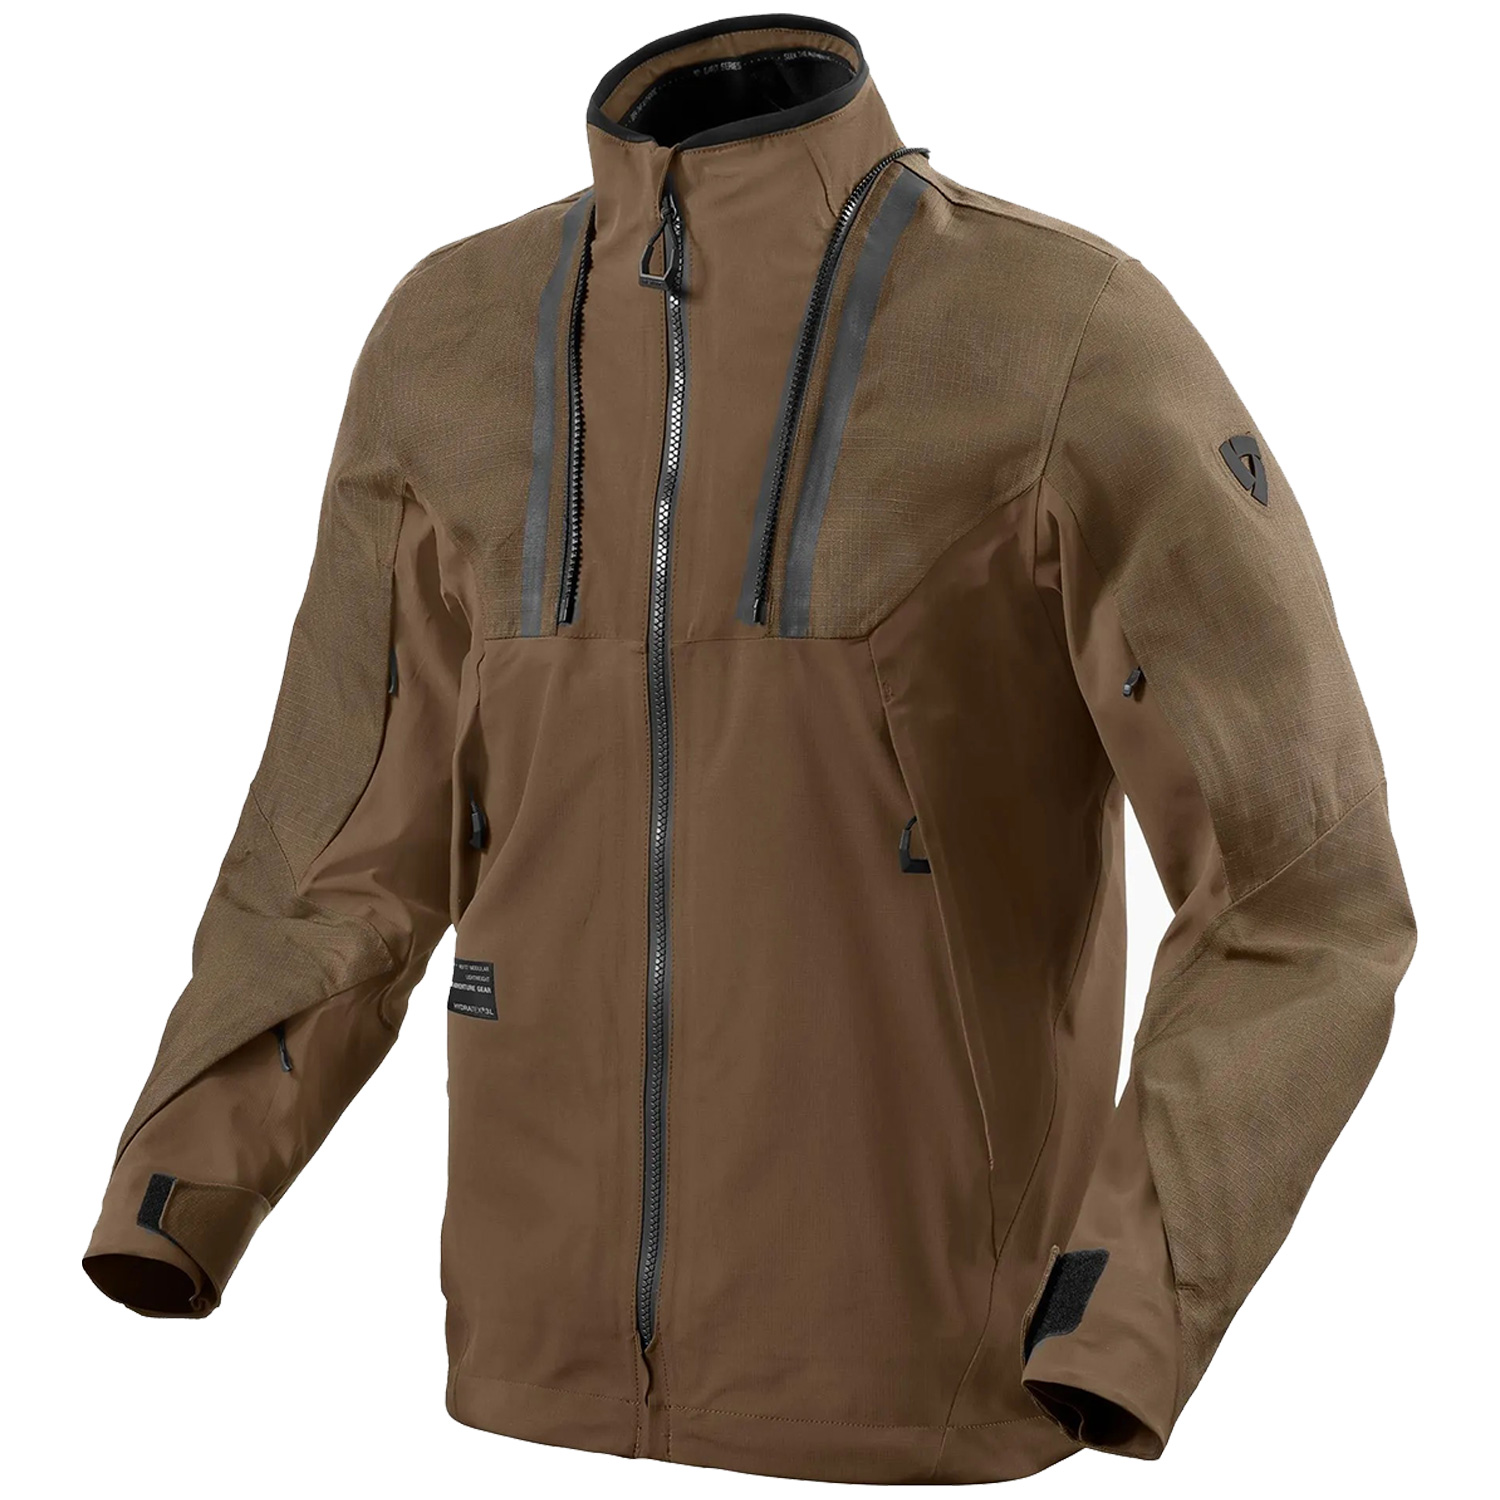 Image of REV'IT! Component 2 H2O Jacket Brown Size S ID 8700001370691